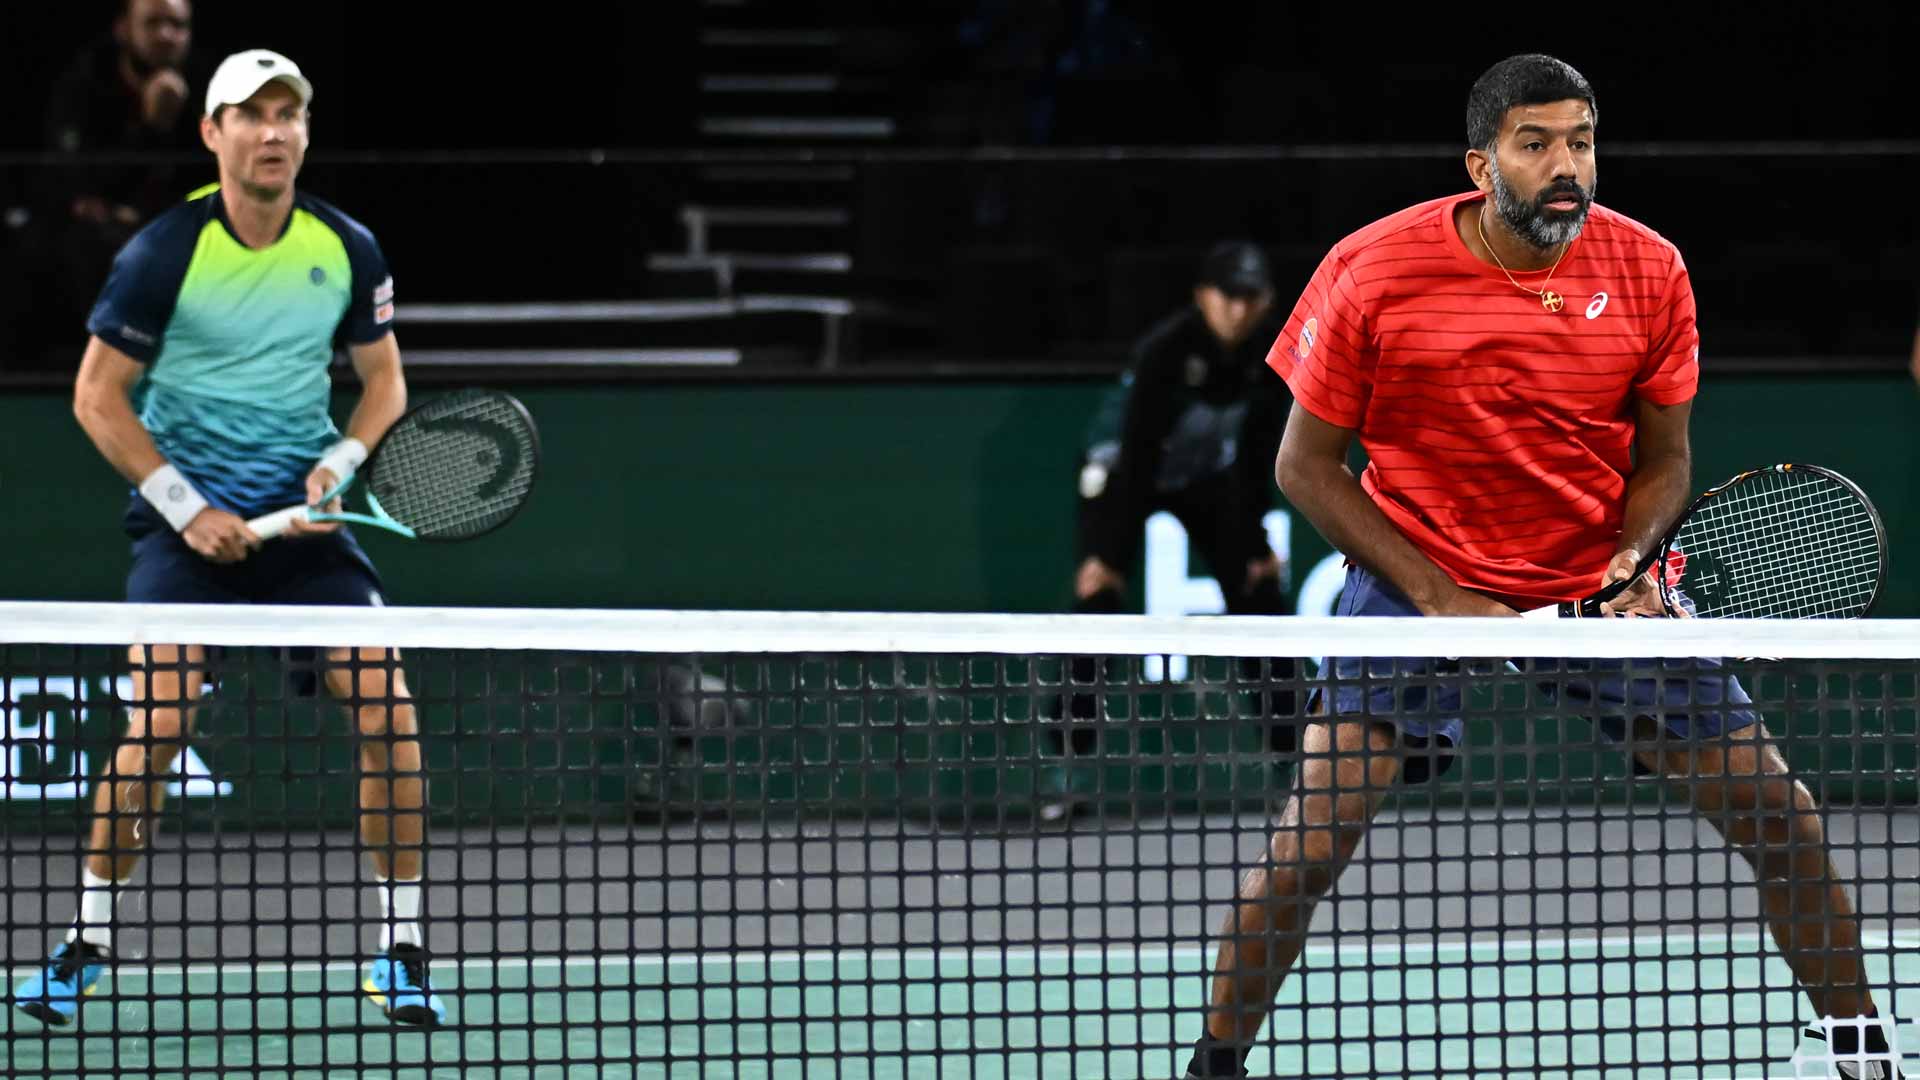 Matthew Ebden and Rohan Bopanna in action Friday at the Rolex Paris Masters.